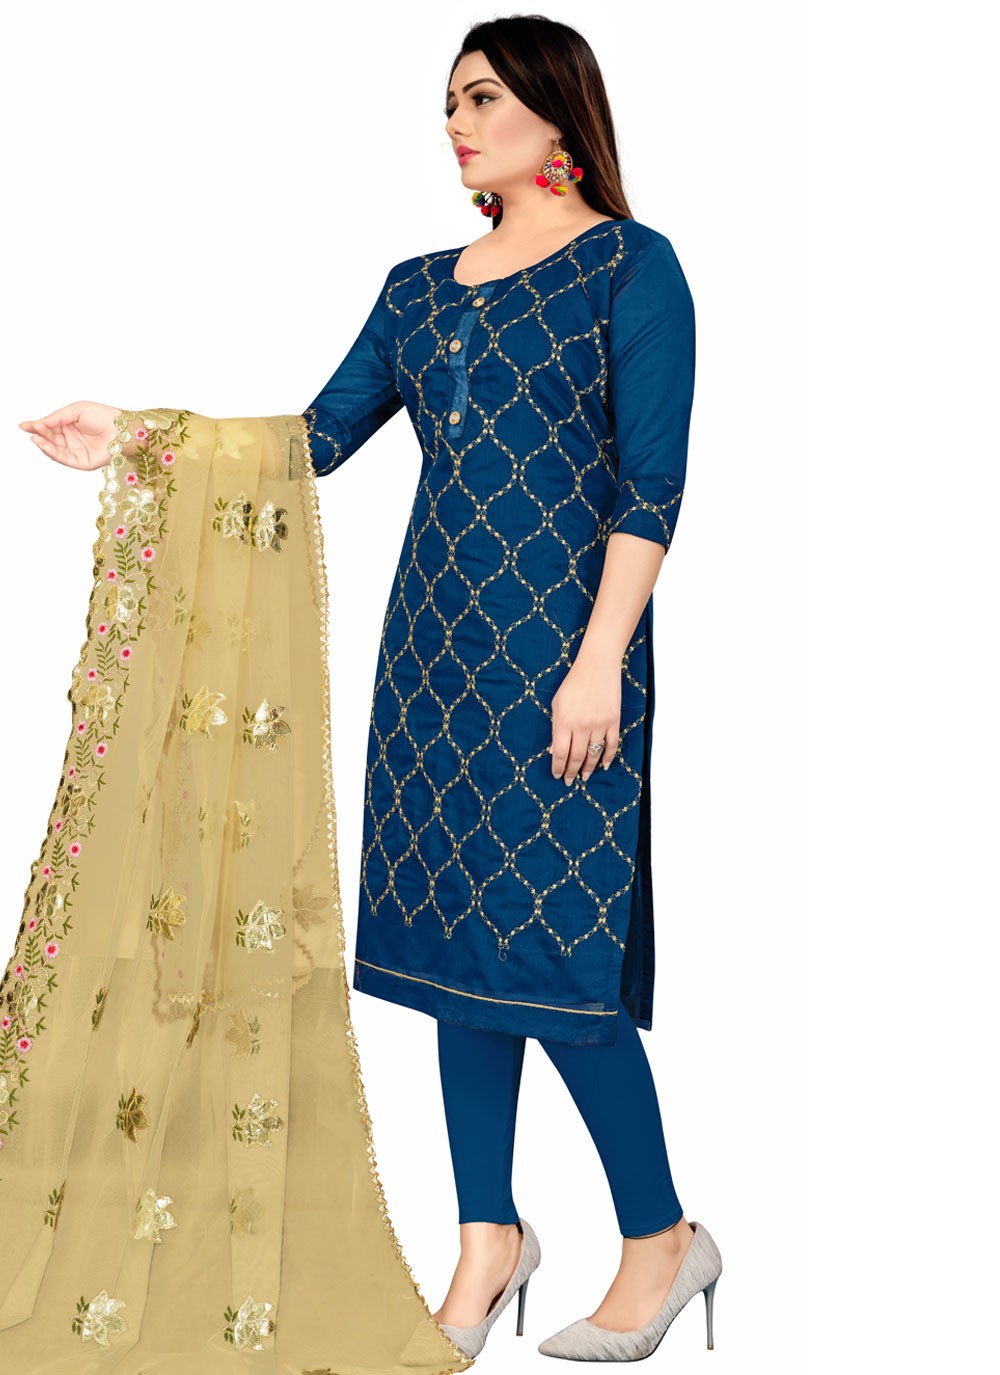 Chanderi Embroidered Churidar Suit in Blue